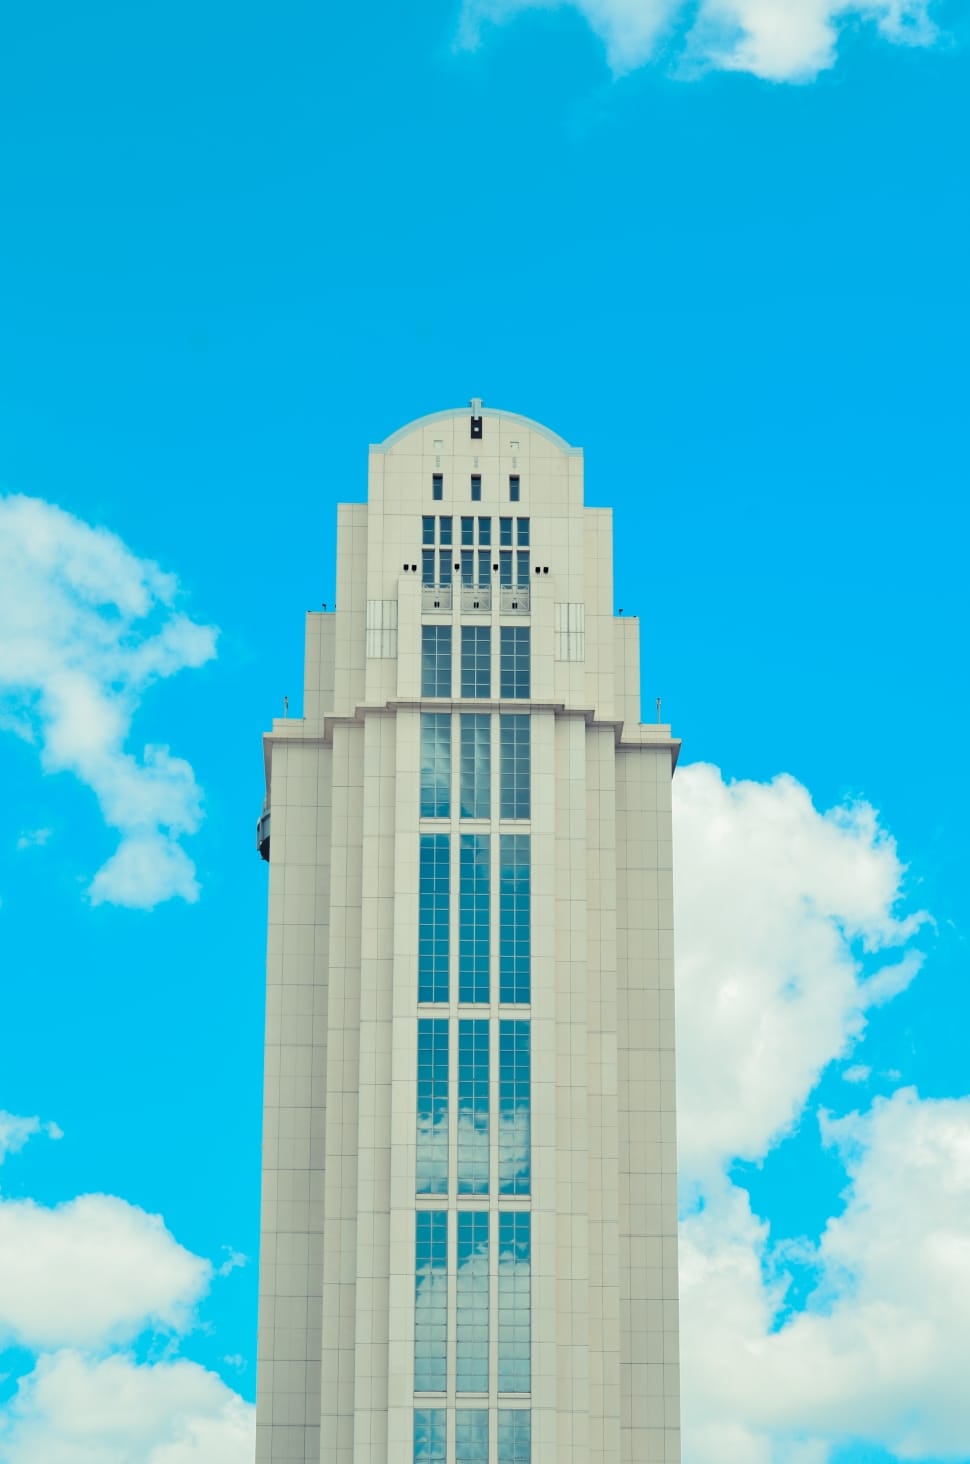 low angle view photo of white high-rise building under blue sky with cumulus clouds preview